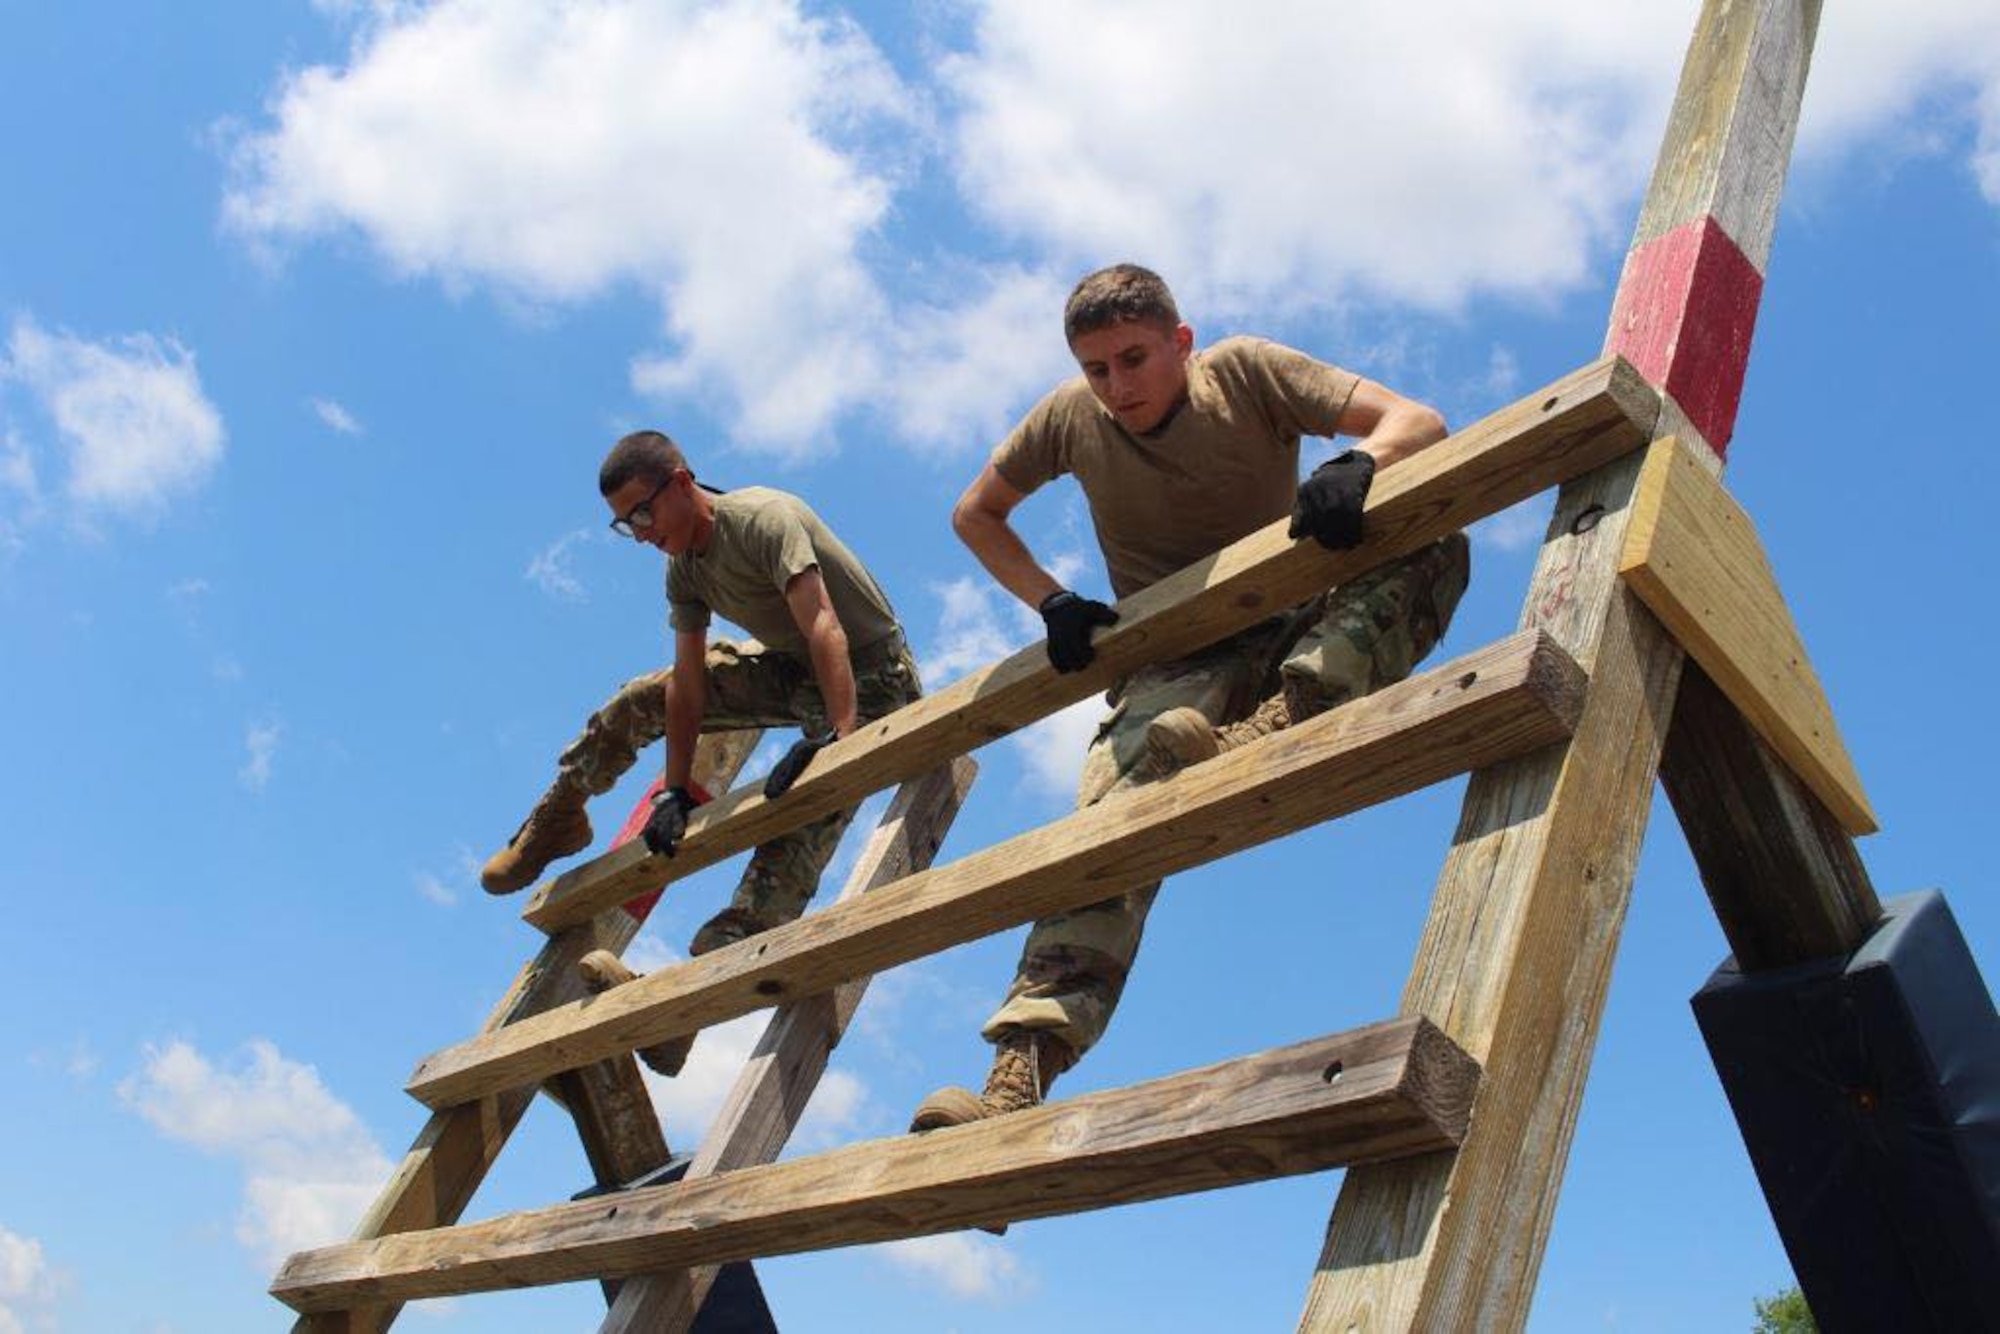 Air Force ROTC cadets take part in an obstacle course in May 2022, on Maxwell Air Force Base, Alabama. This is the first time since 2019 that field training will be conducted at normal capacity on Maxwell throughout the summer, marking a departure from modified operations as the COVID-19 pandemic abates.